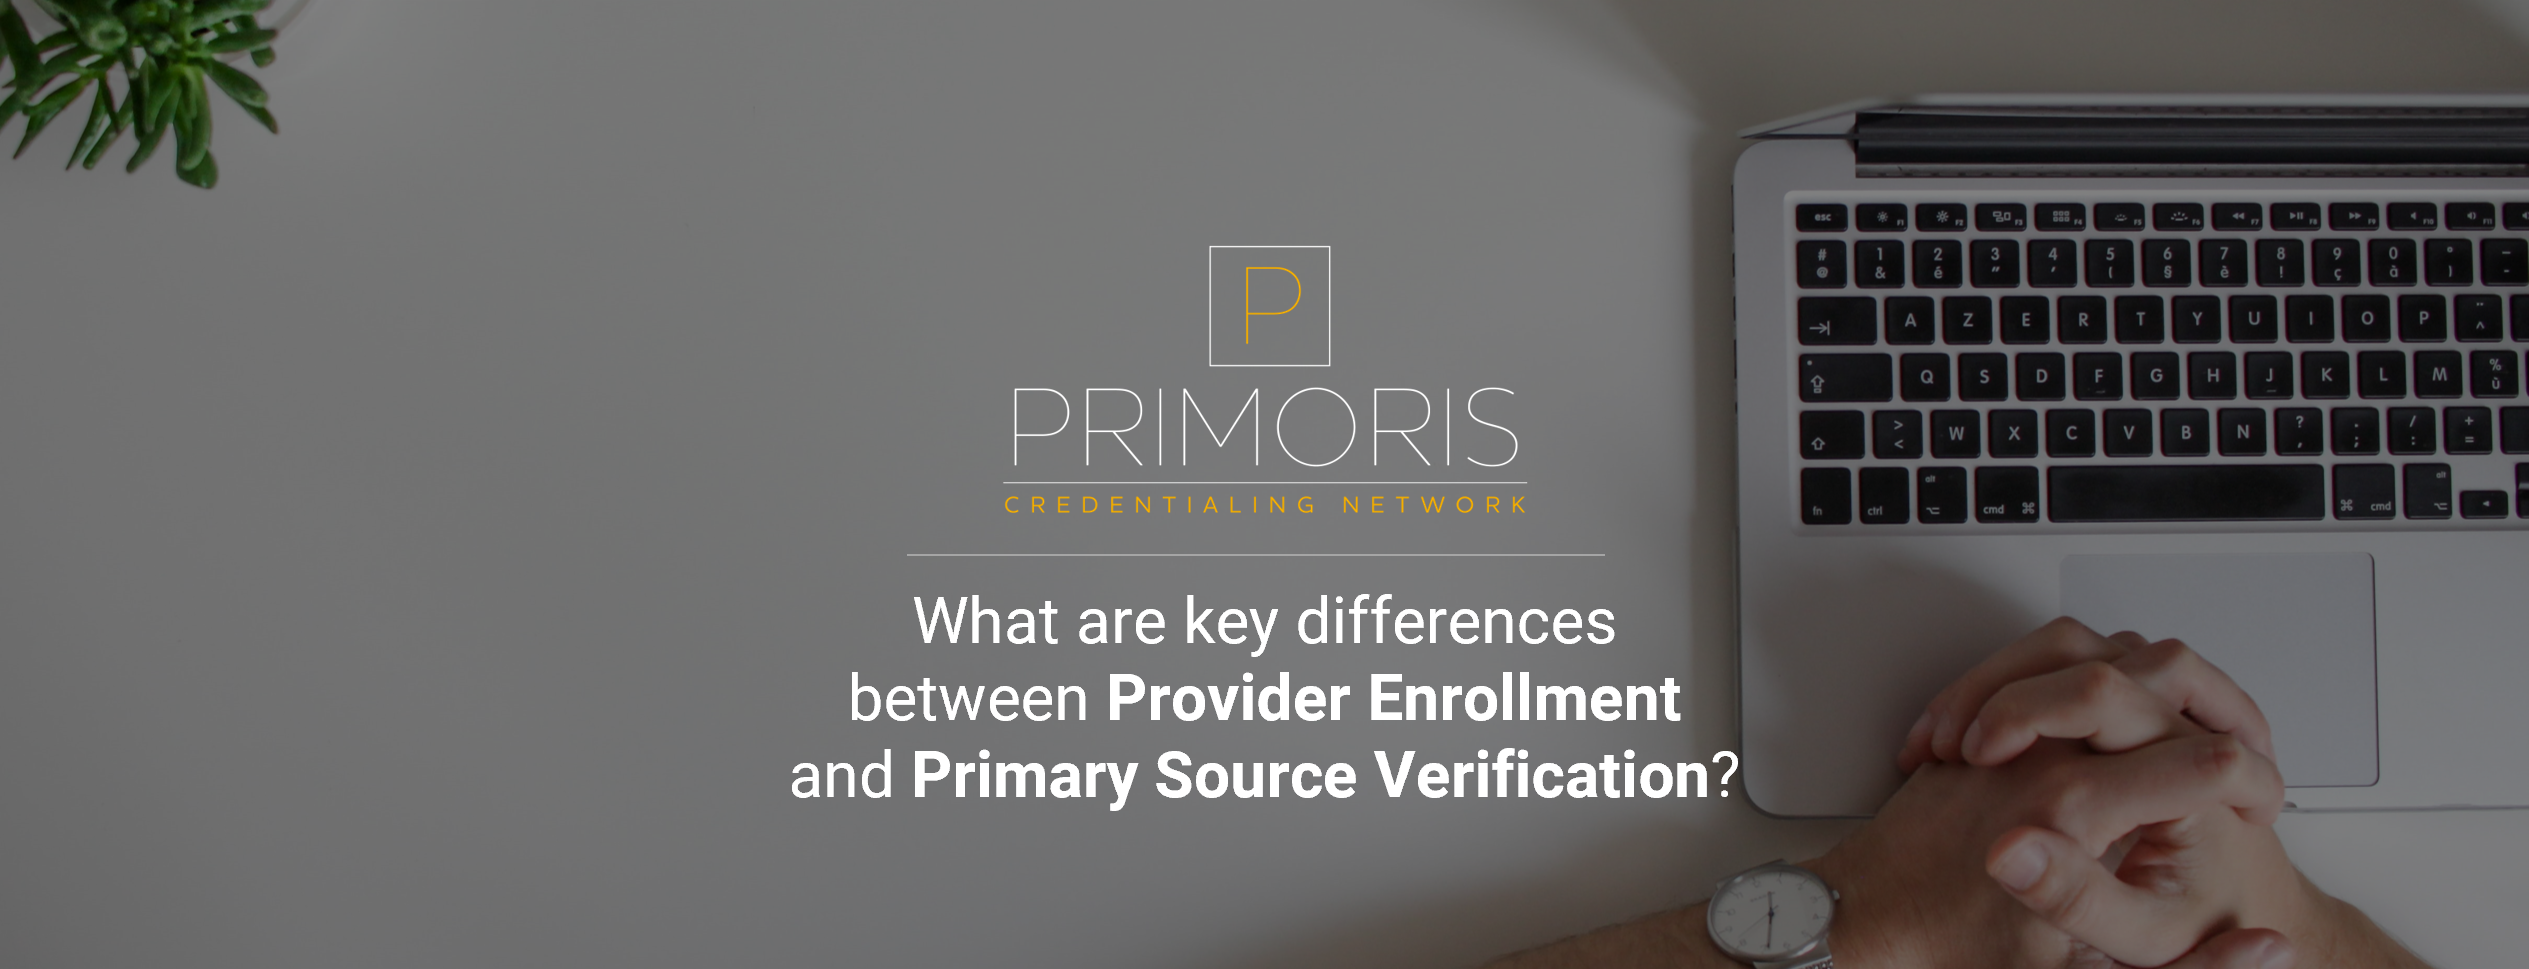 PrimorisCredentialingNetwork.com Credentialing Differences Provider Enrollment and Primary Source Verification